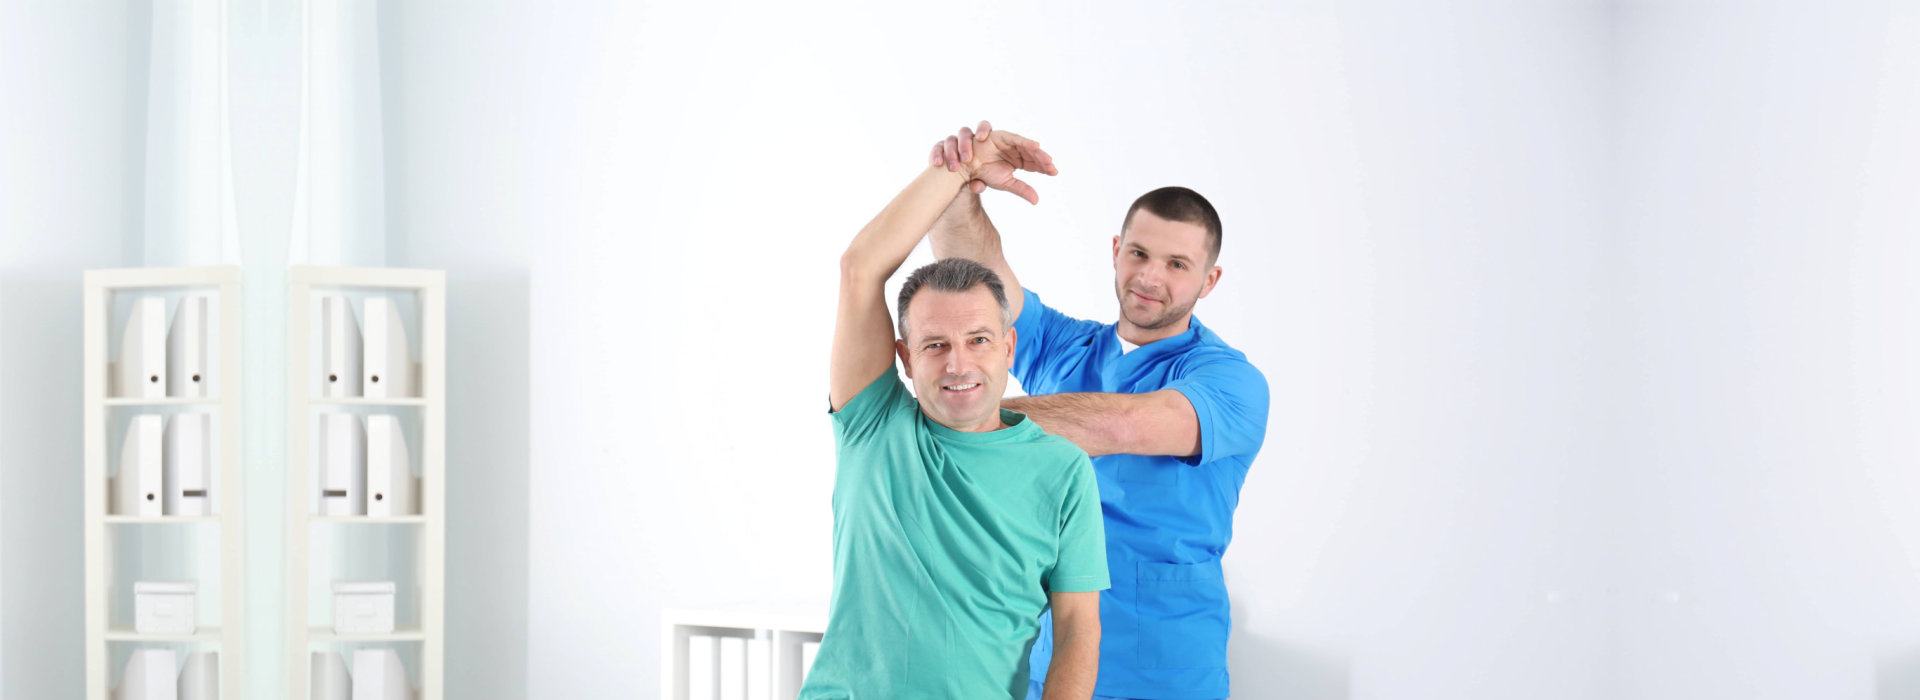 men doing physical therapy